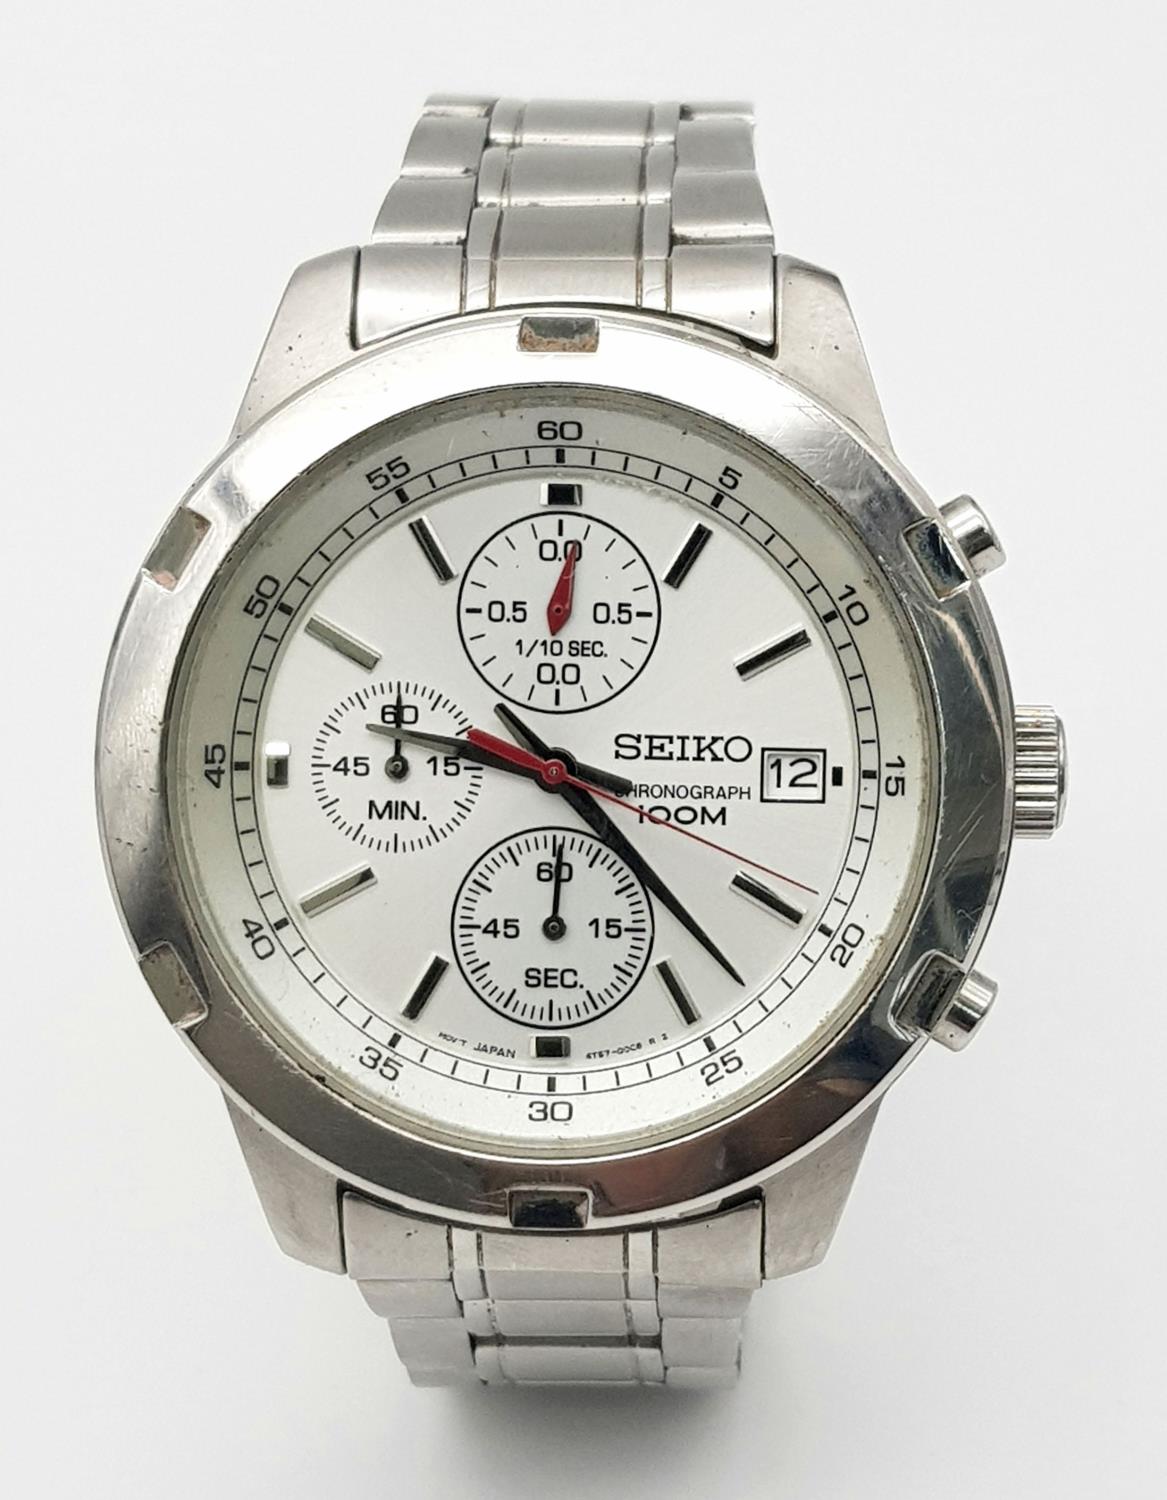 A Seiko 5 Chronograph Quartz Gents Watch. Stainless steel bracelet and case - 43mm. White dial - Image 2 of 6